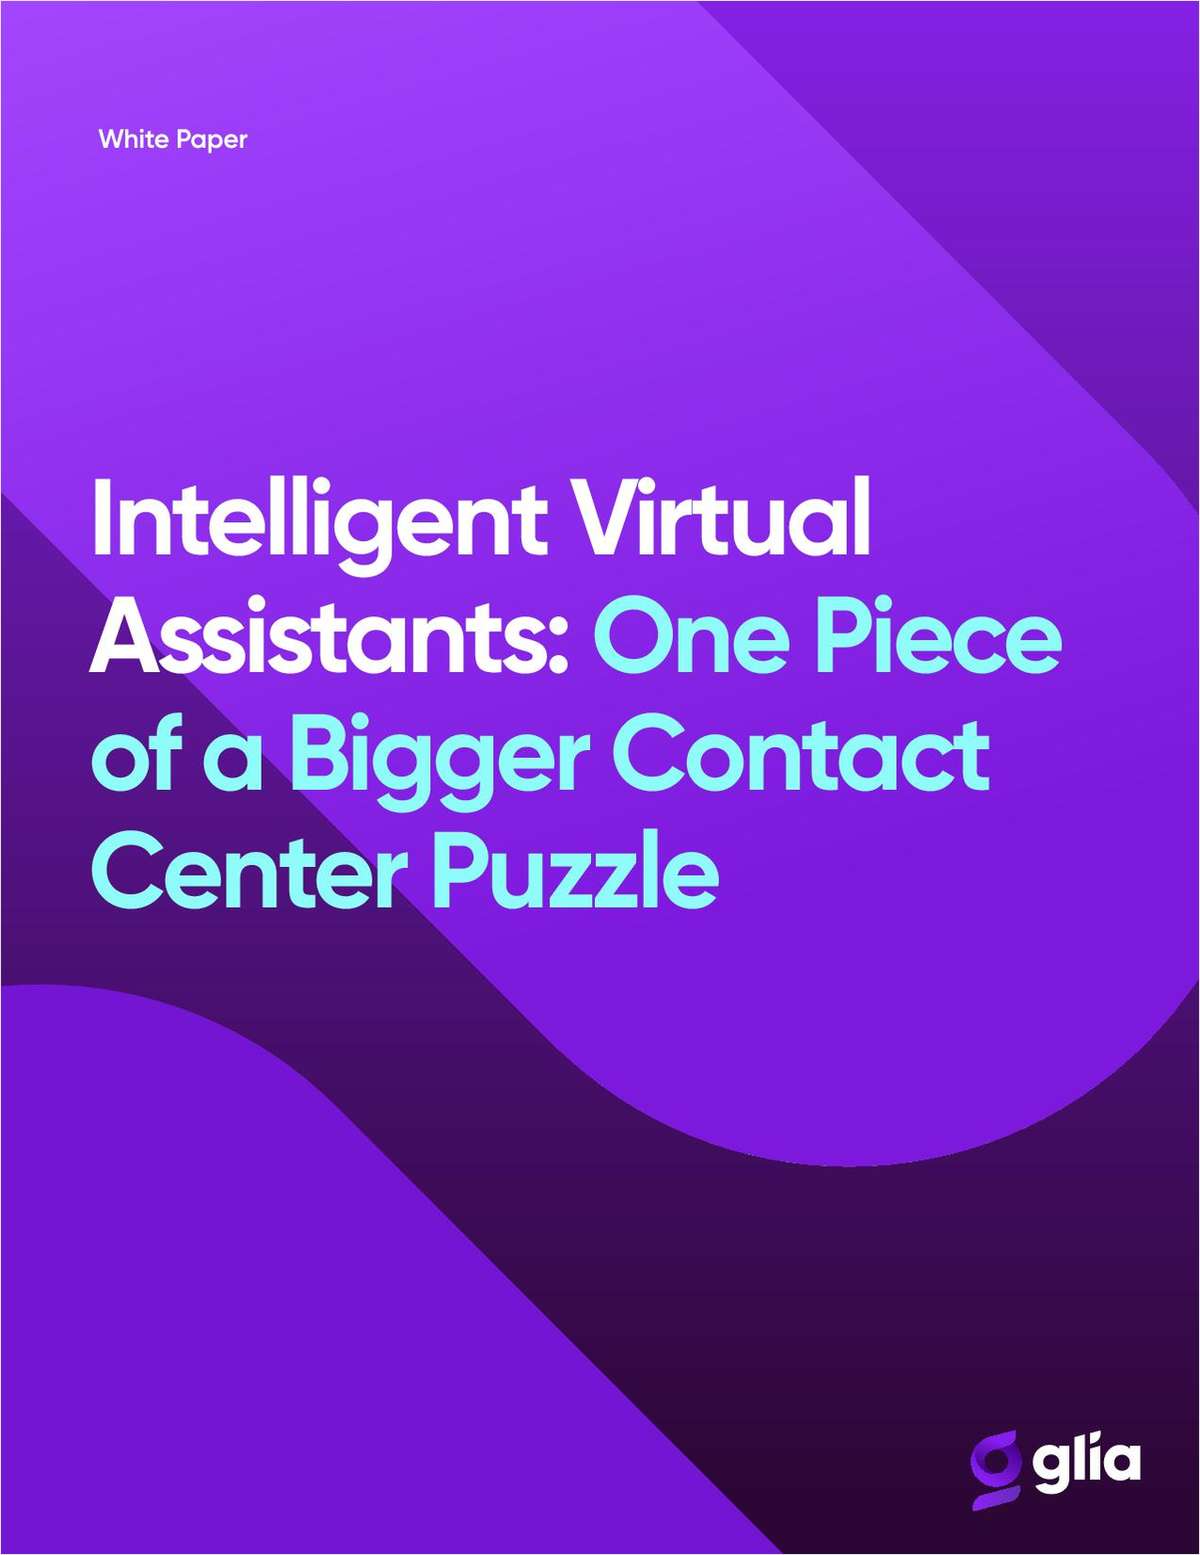 Intelligent Virtual Assistants: One Piece of a Bigger Contact Center Puzzle link